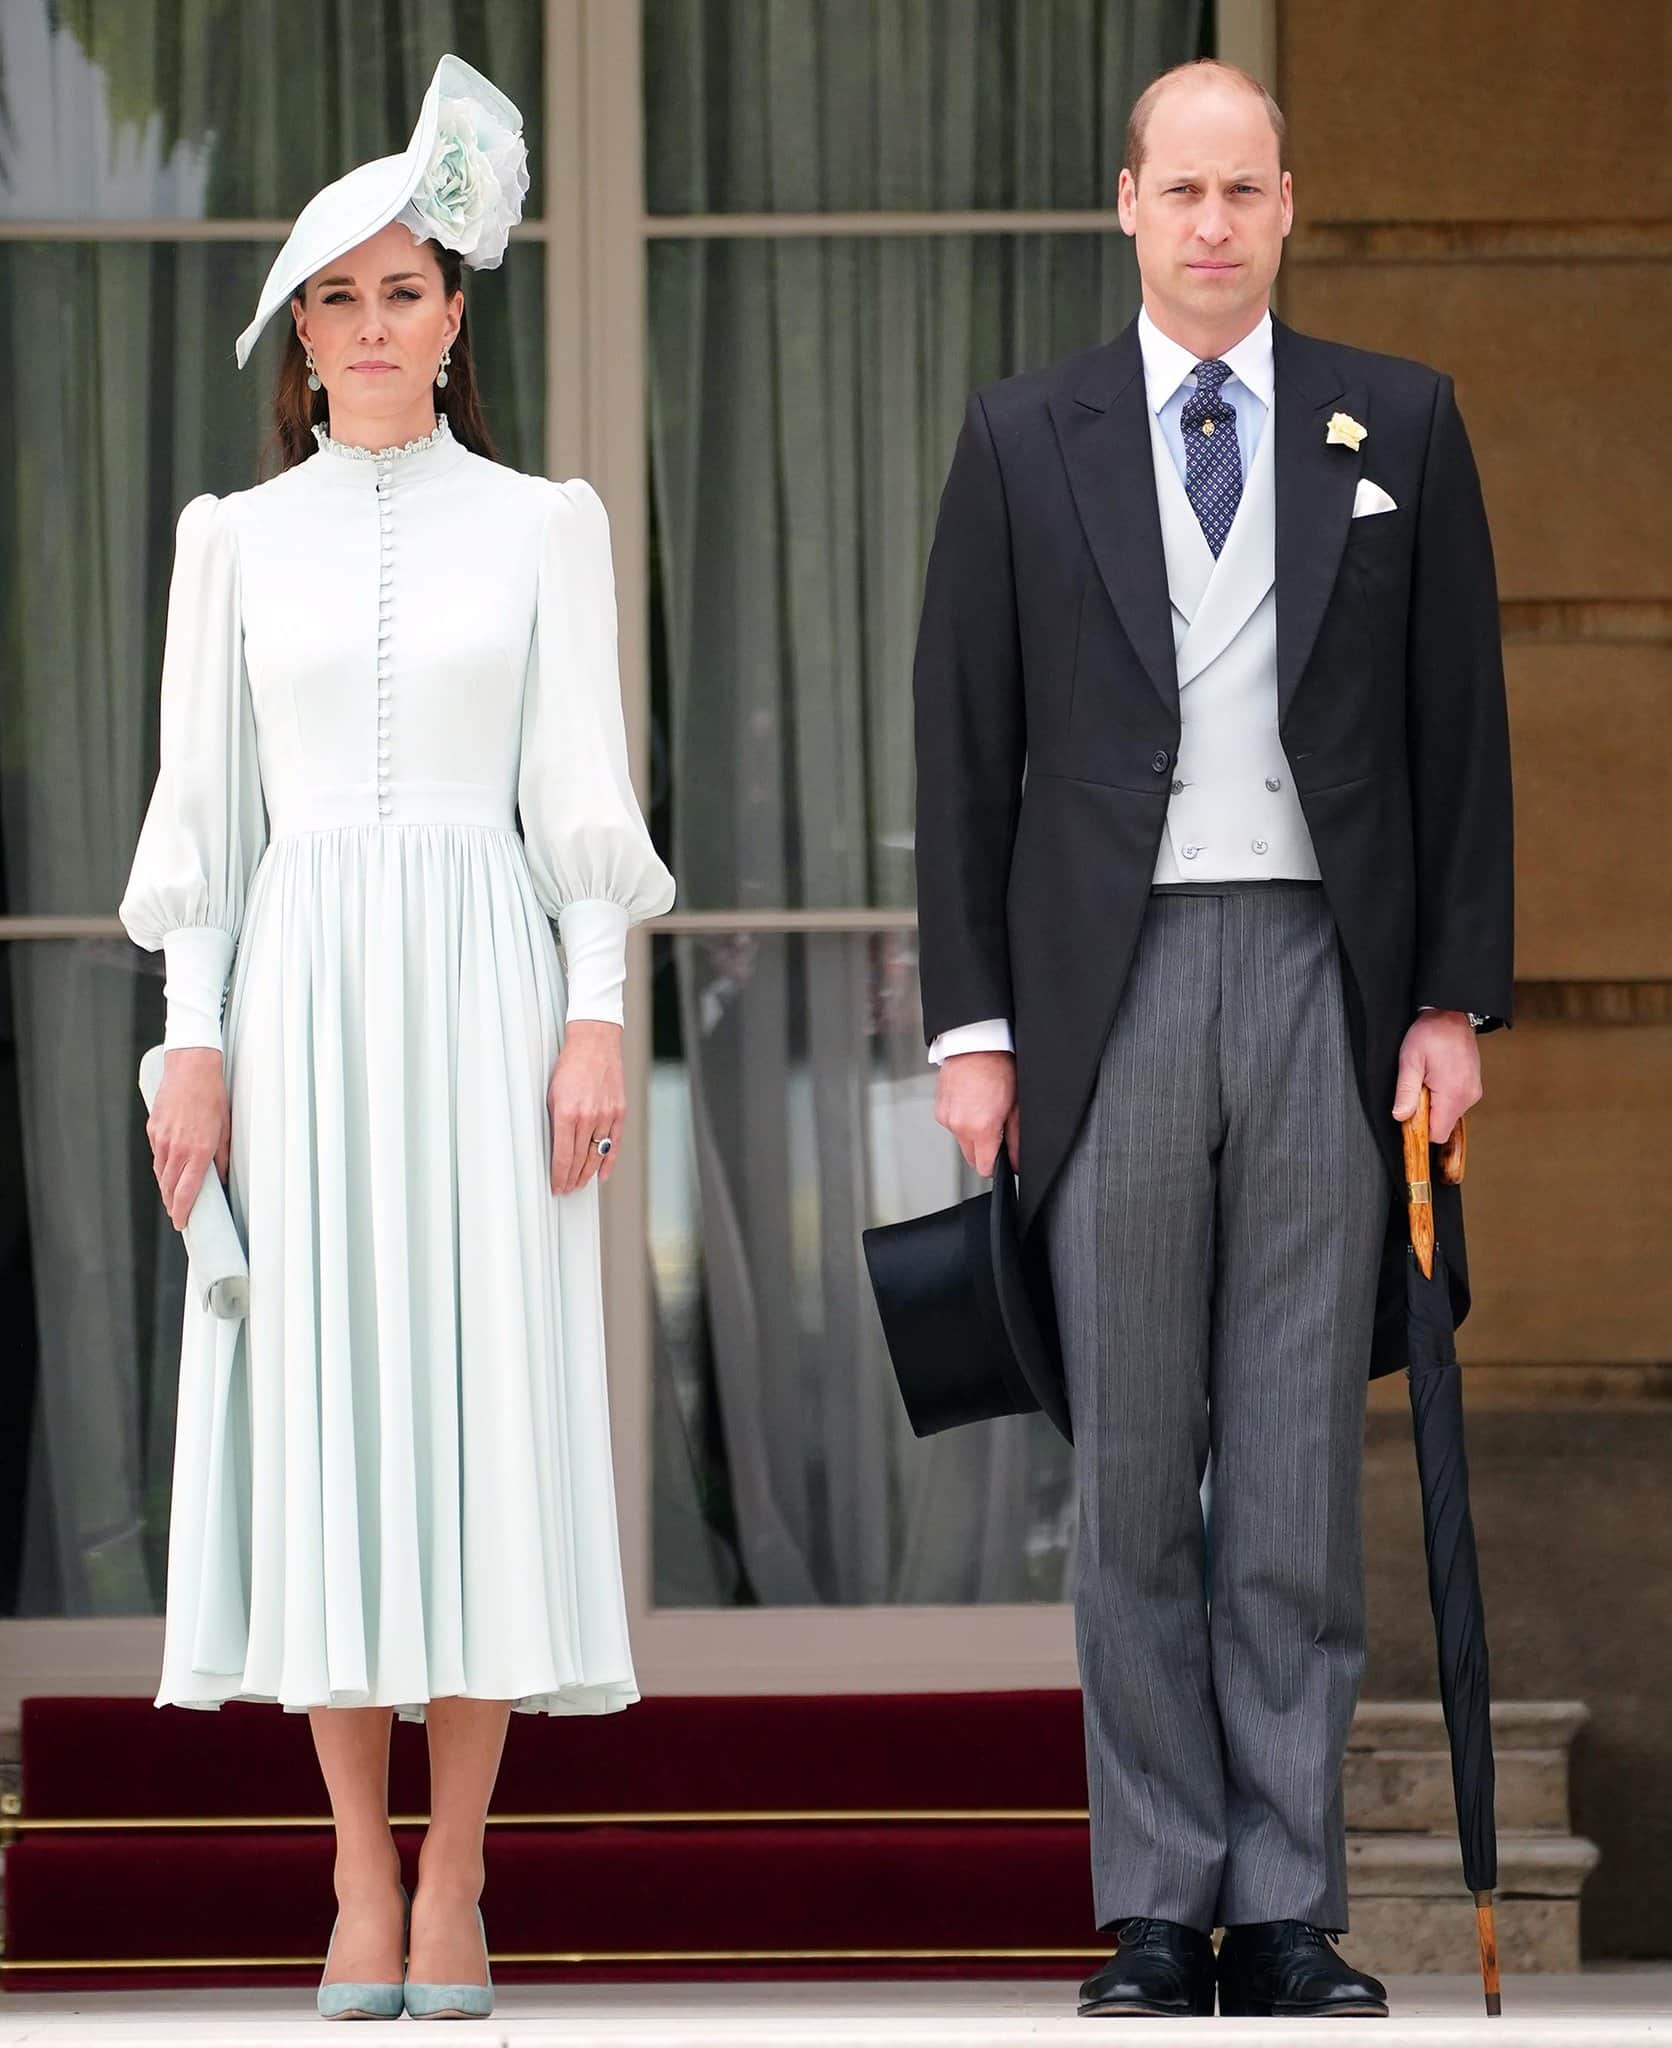 Kate Middleton in a mint green dress with matching Philip Treacy Oc 896 hat and Jimmy Choo Romy pumps at the Royal Garden Party at Buckingham Palace on May 25, 2022